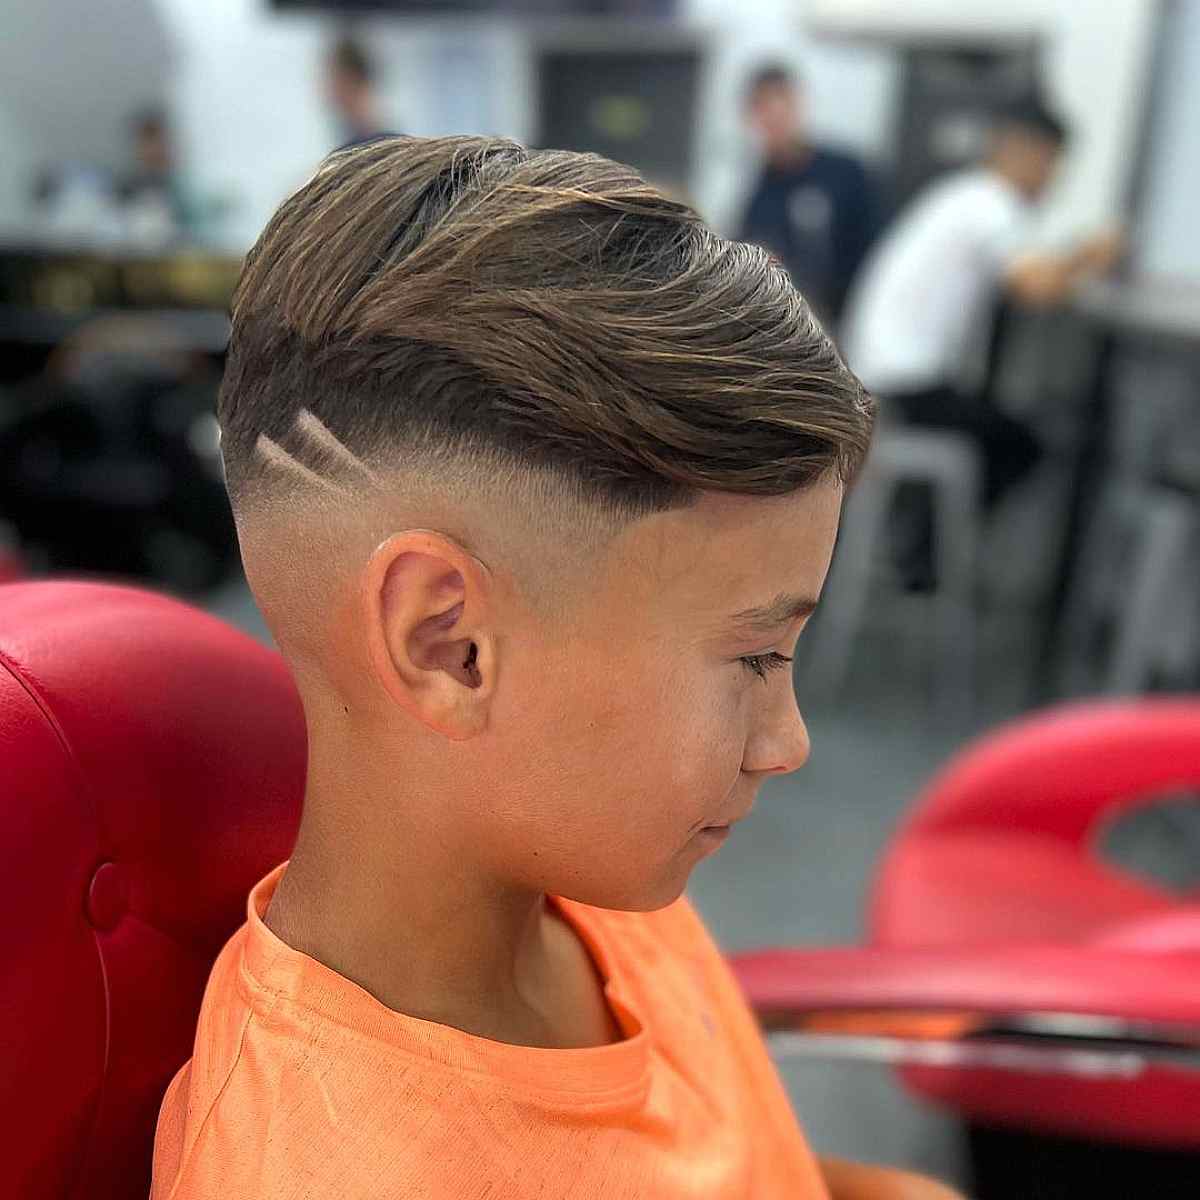 Cute European Boy Getting Hairstyle, Hairdresser Makes a Hairstyle for a Boy .Side View Stock Photo - Image of barber, salon: 223783518